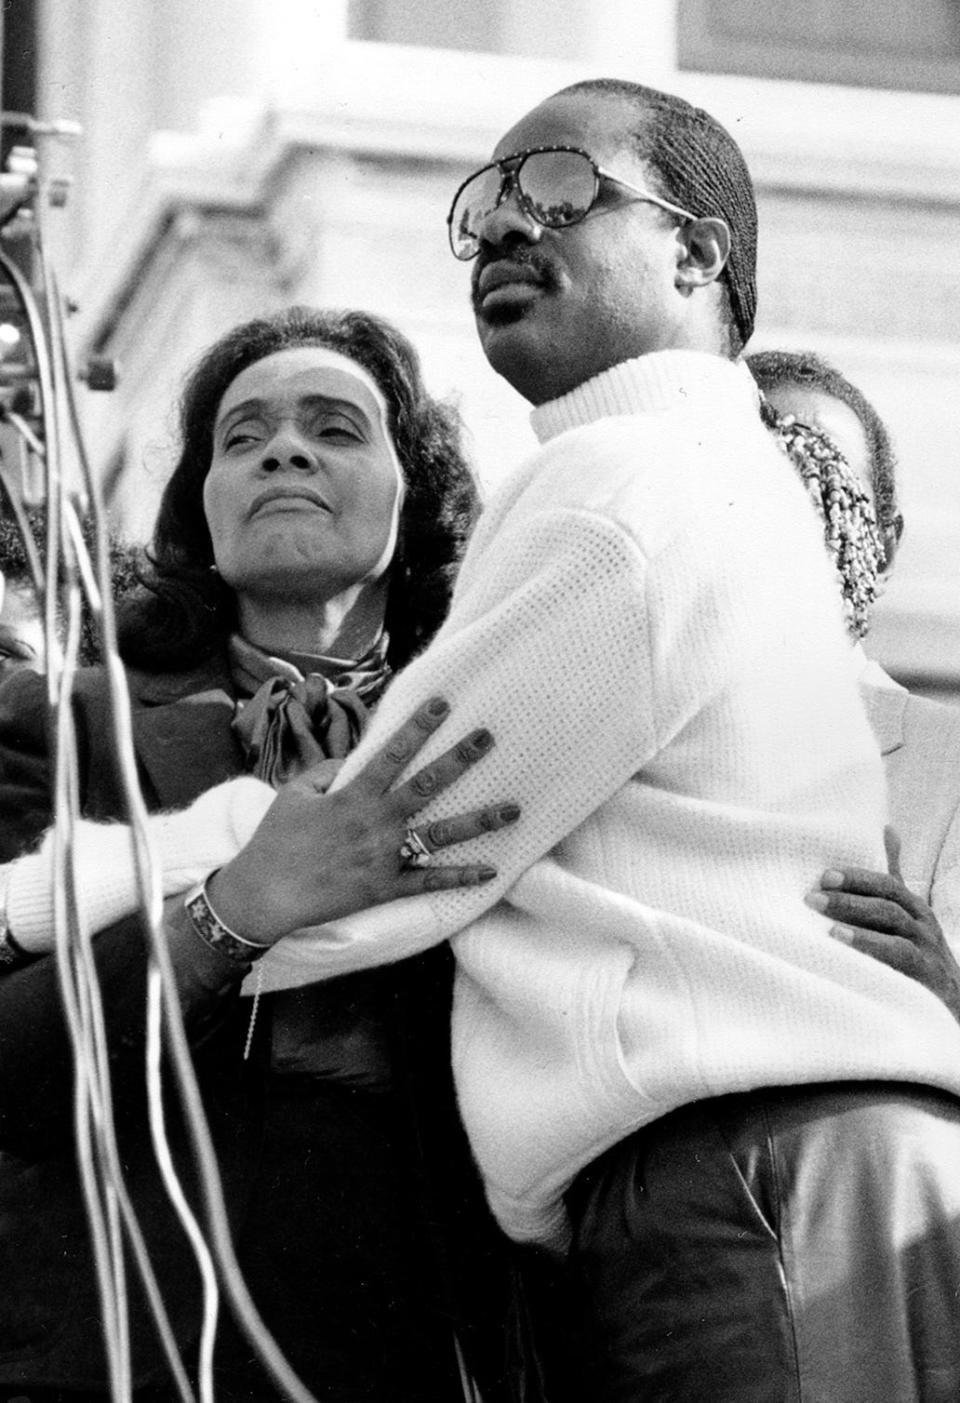 Coretta Scott King, widow of the Rev. Martin Luther King Jr., embraces singer Stevie Wonder during a celebration on the steps of the U.S. Capitol Building in Washington, D.C., Nov. 3, 1983, after President Ronald Reagan signed a bill making the civil rights leader's birthday, Jan. 15, a national holiday.